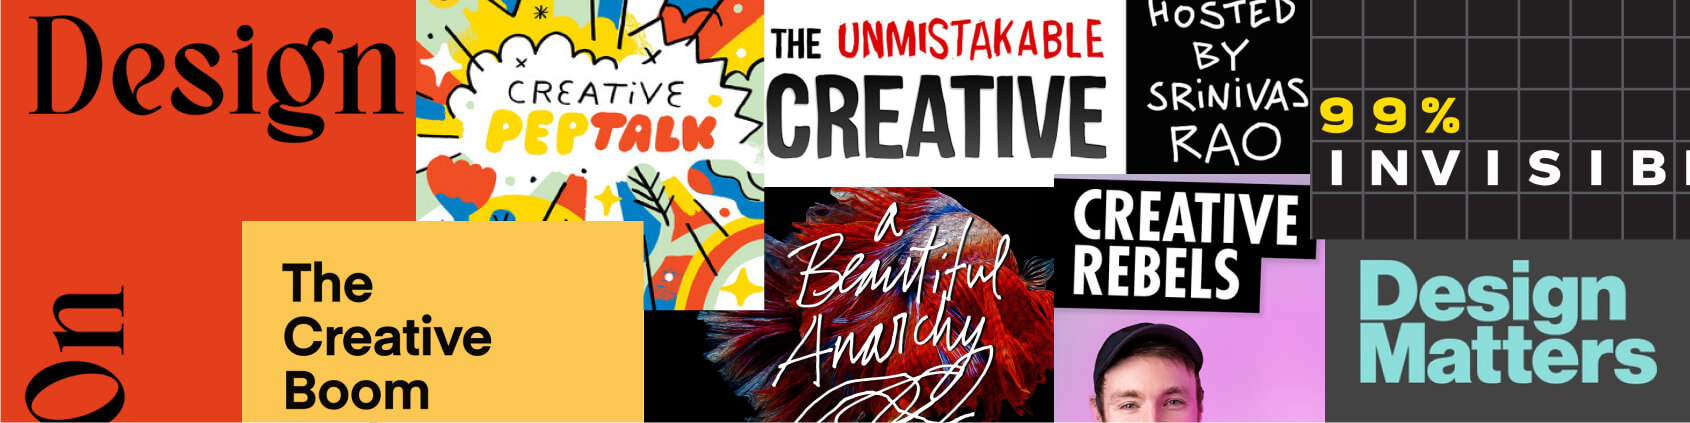 Podcasts on creativity and design